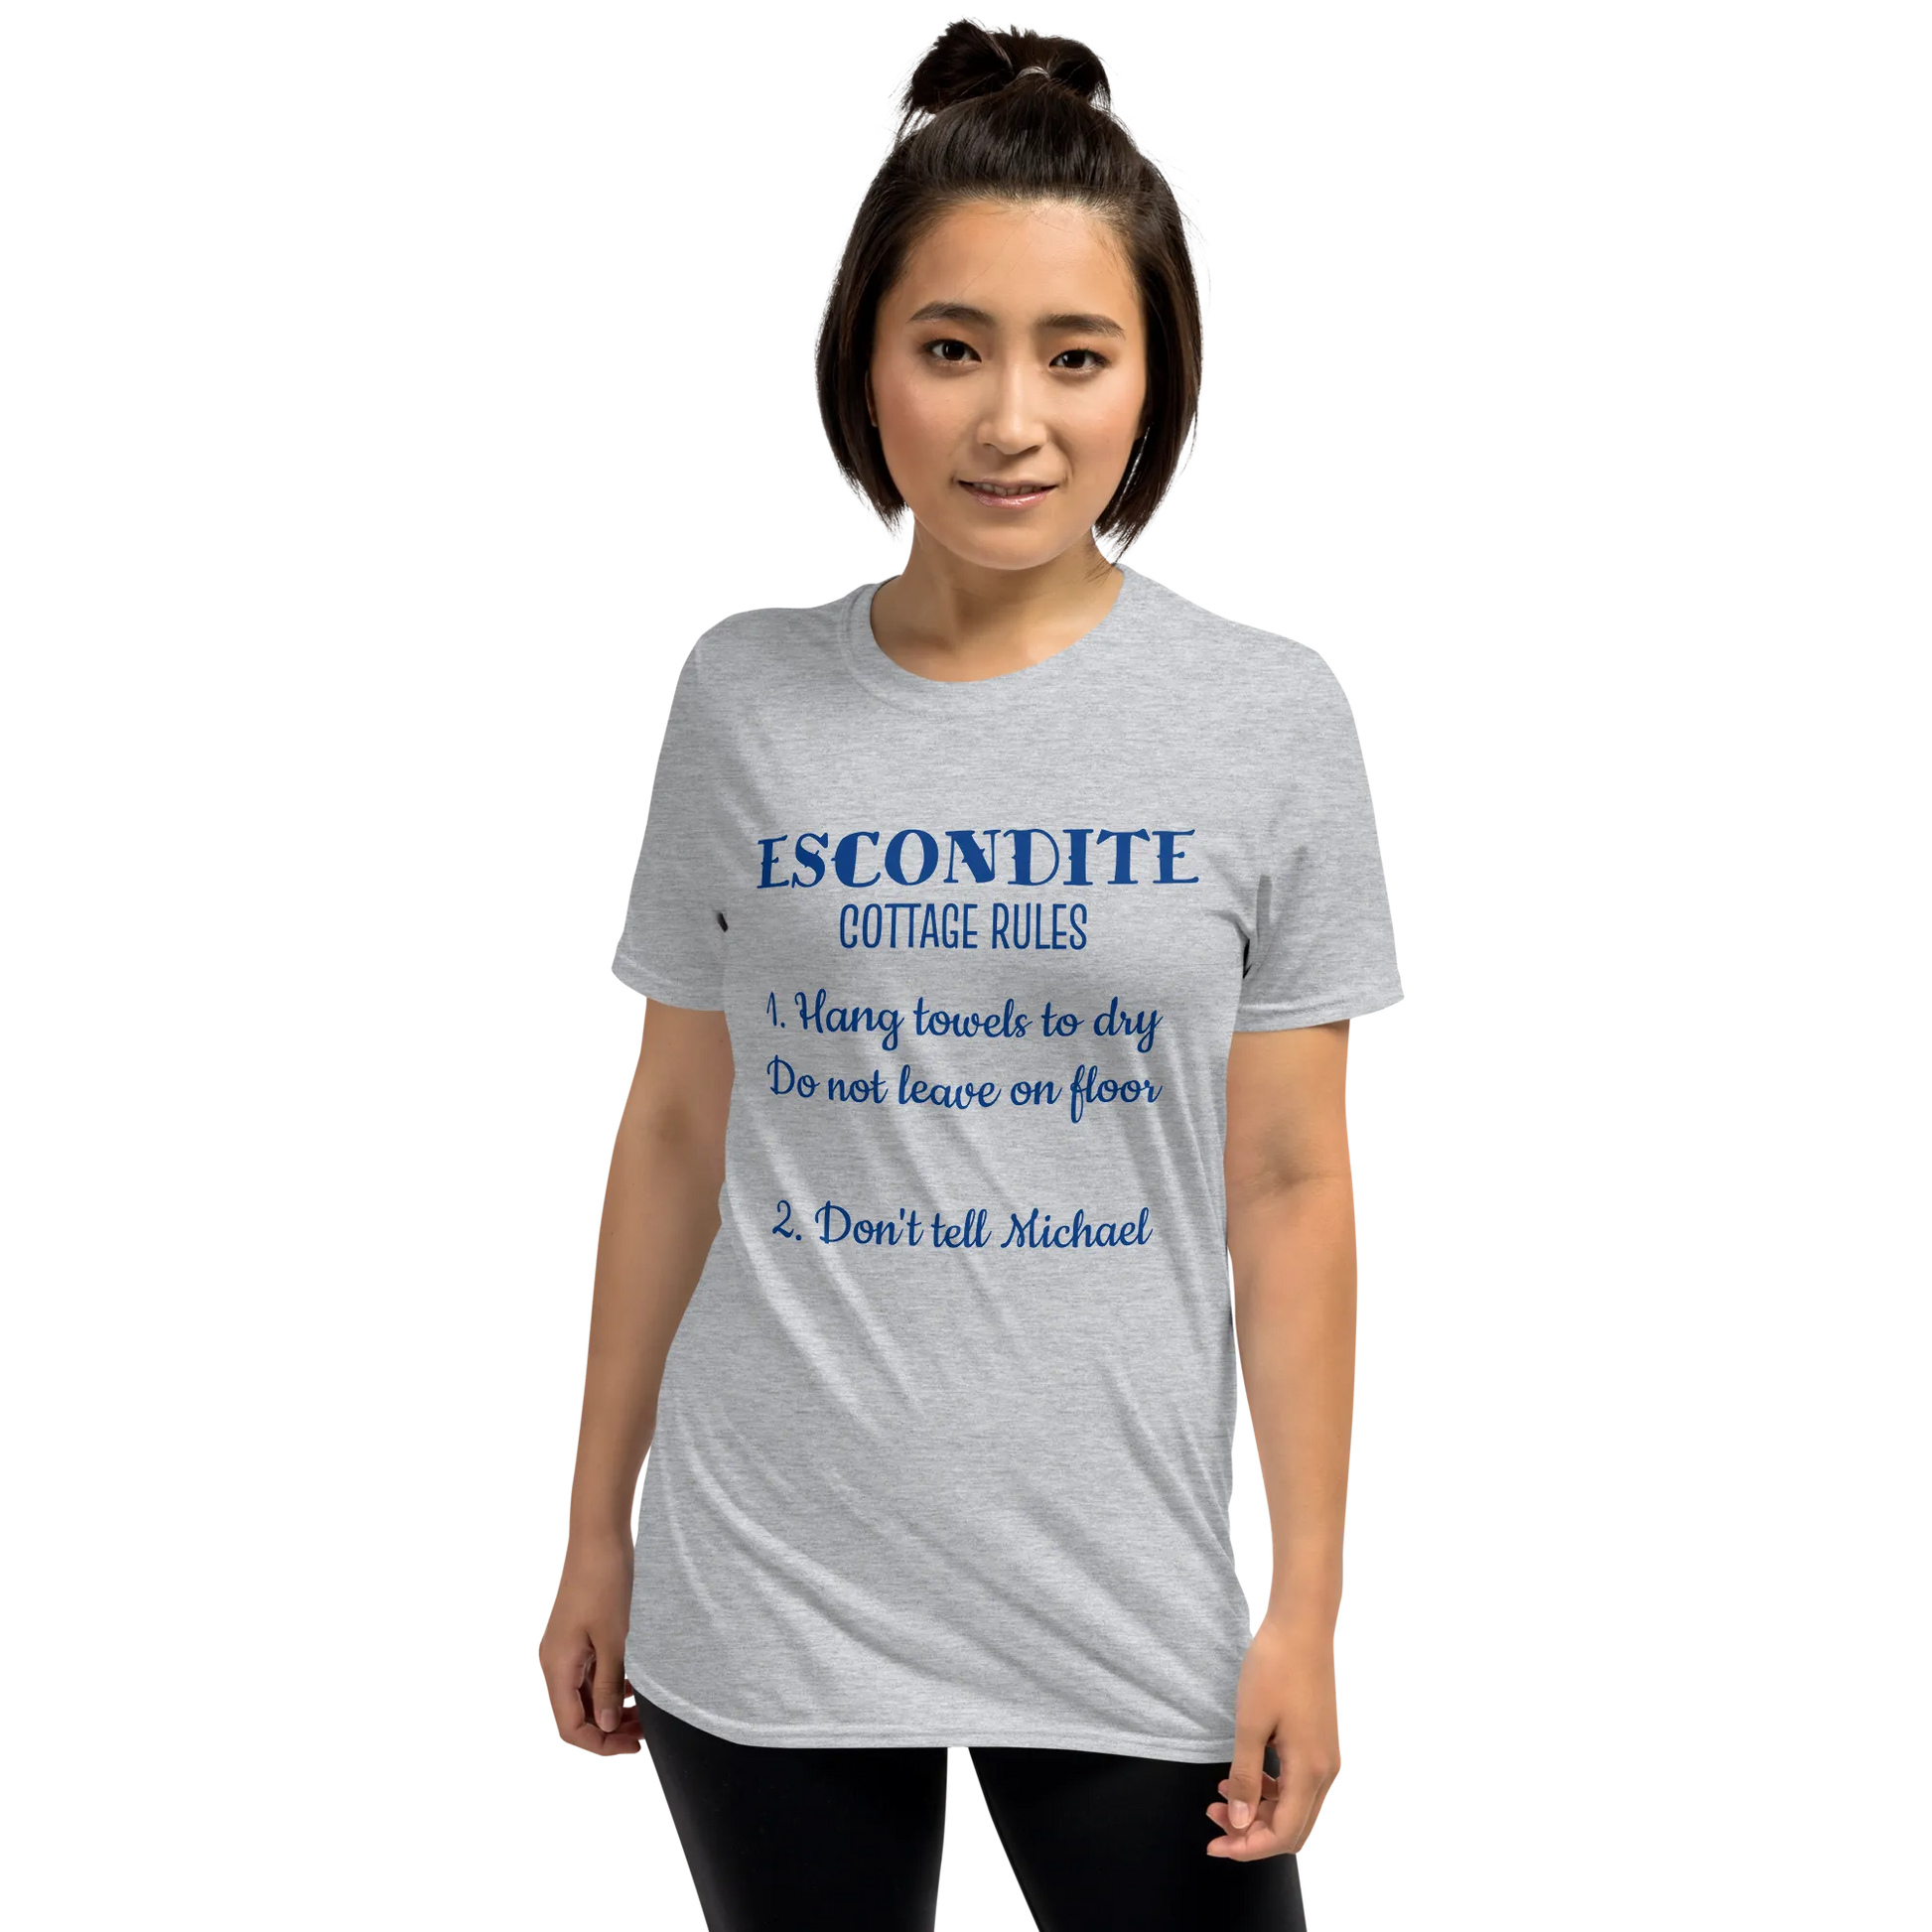 ESCONDITE Cottage Rules Tee in Sport Grey on woman front